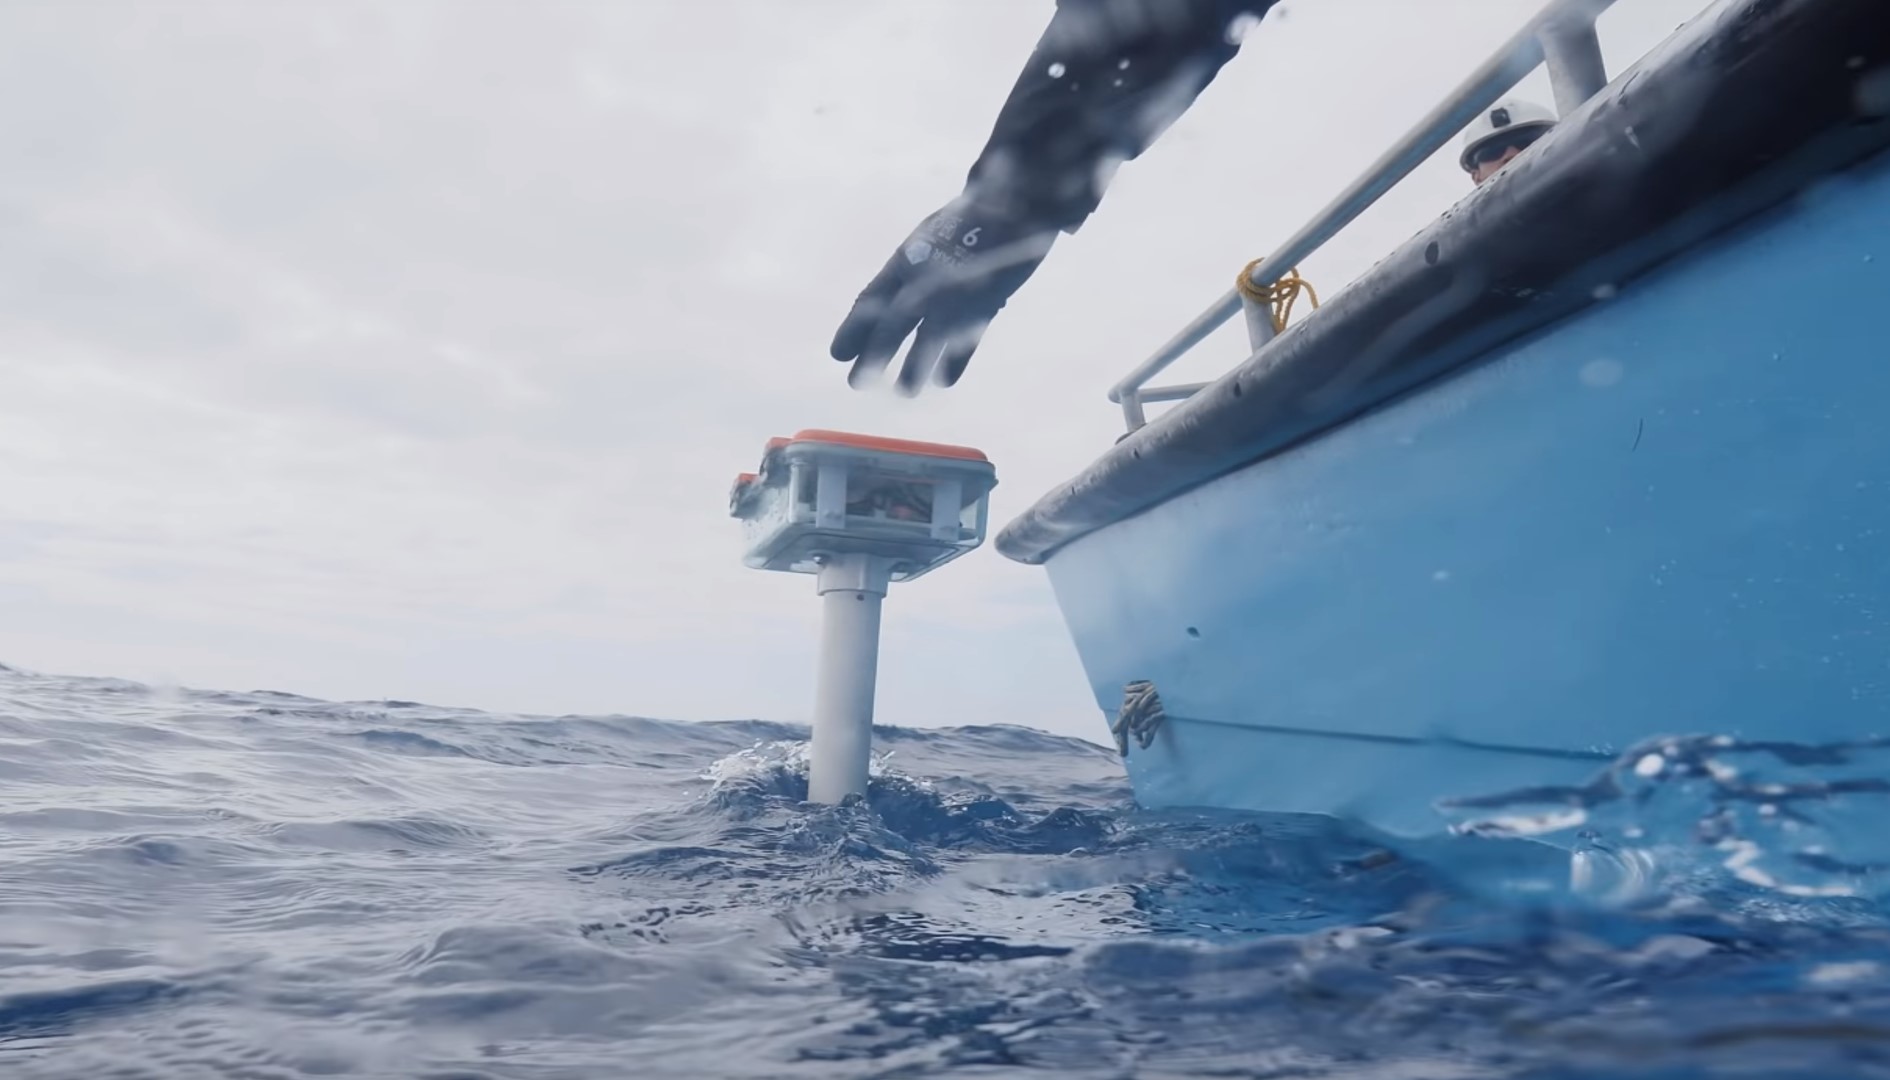 Pavalko’s buoy is tested at sea.